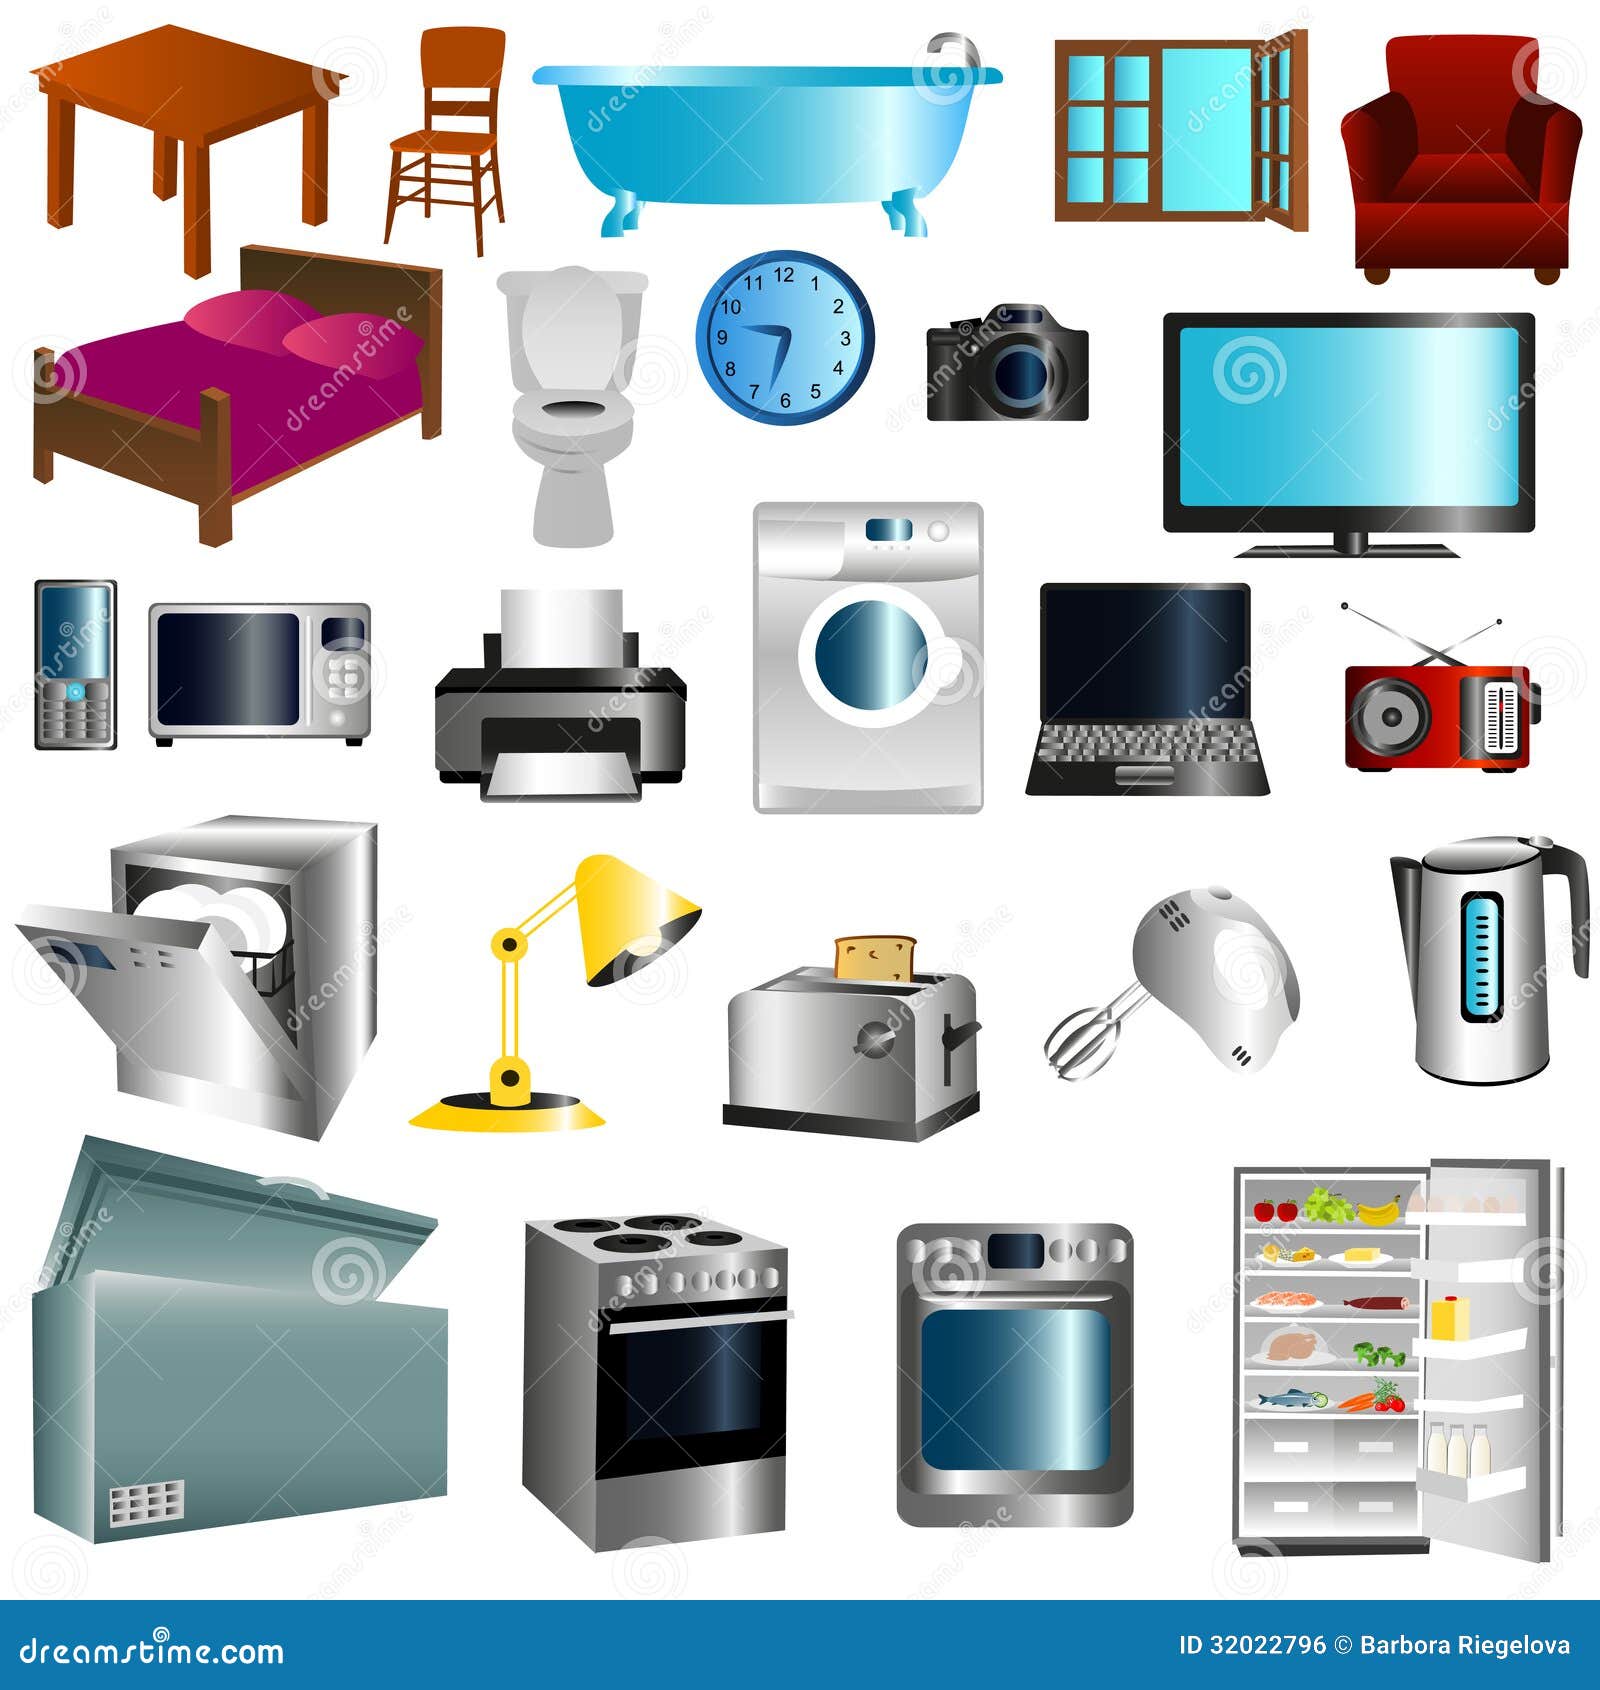 home appliances clipart free download - photo #41